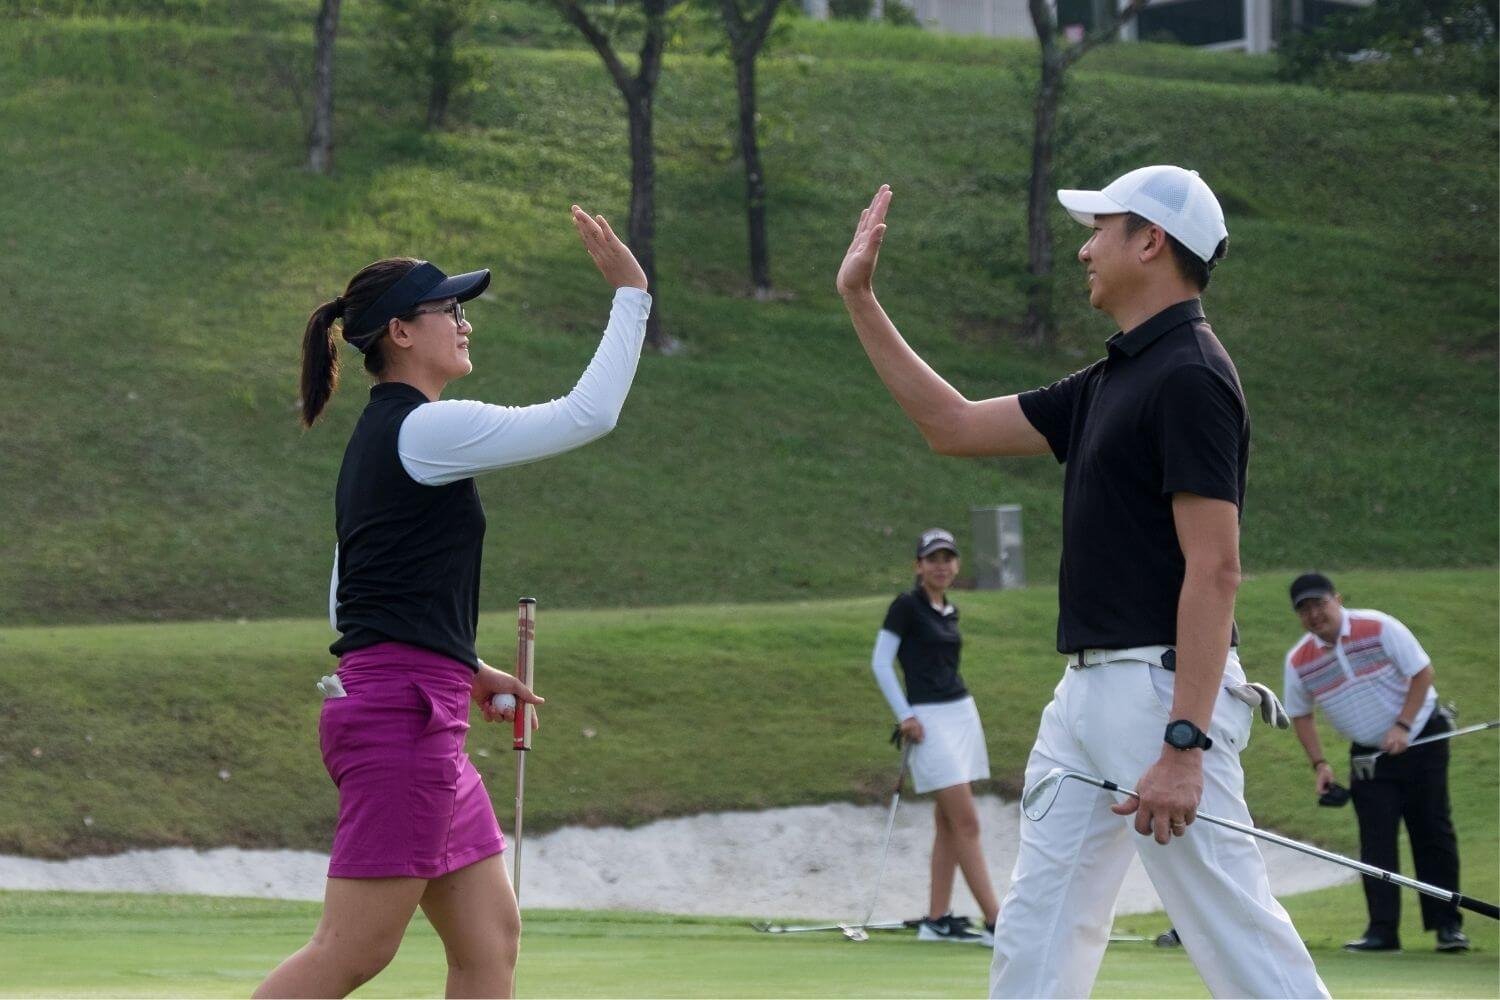 Female and male golfers giving each other a high five on the course